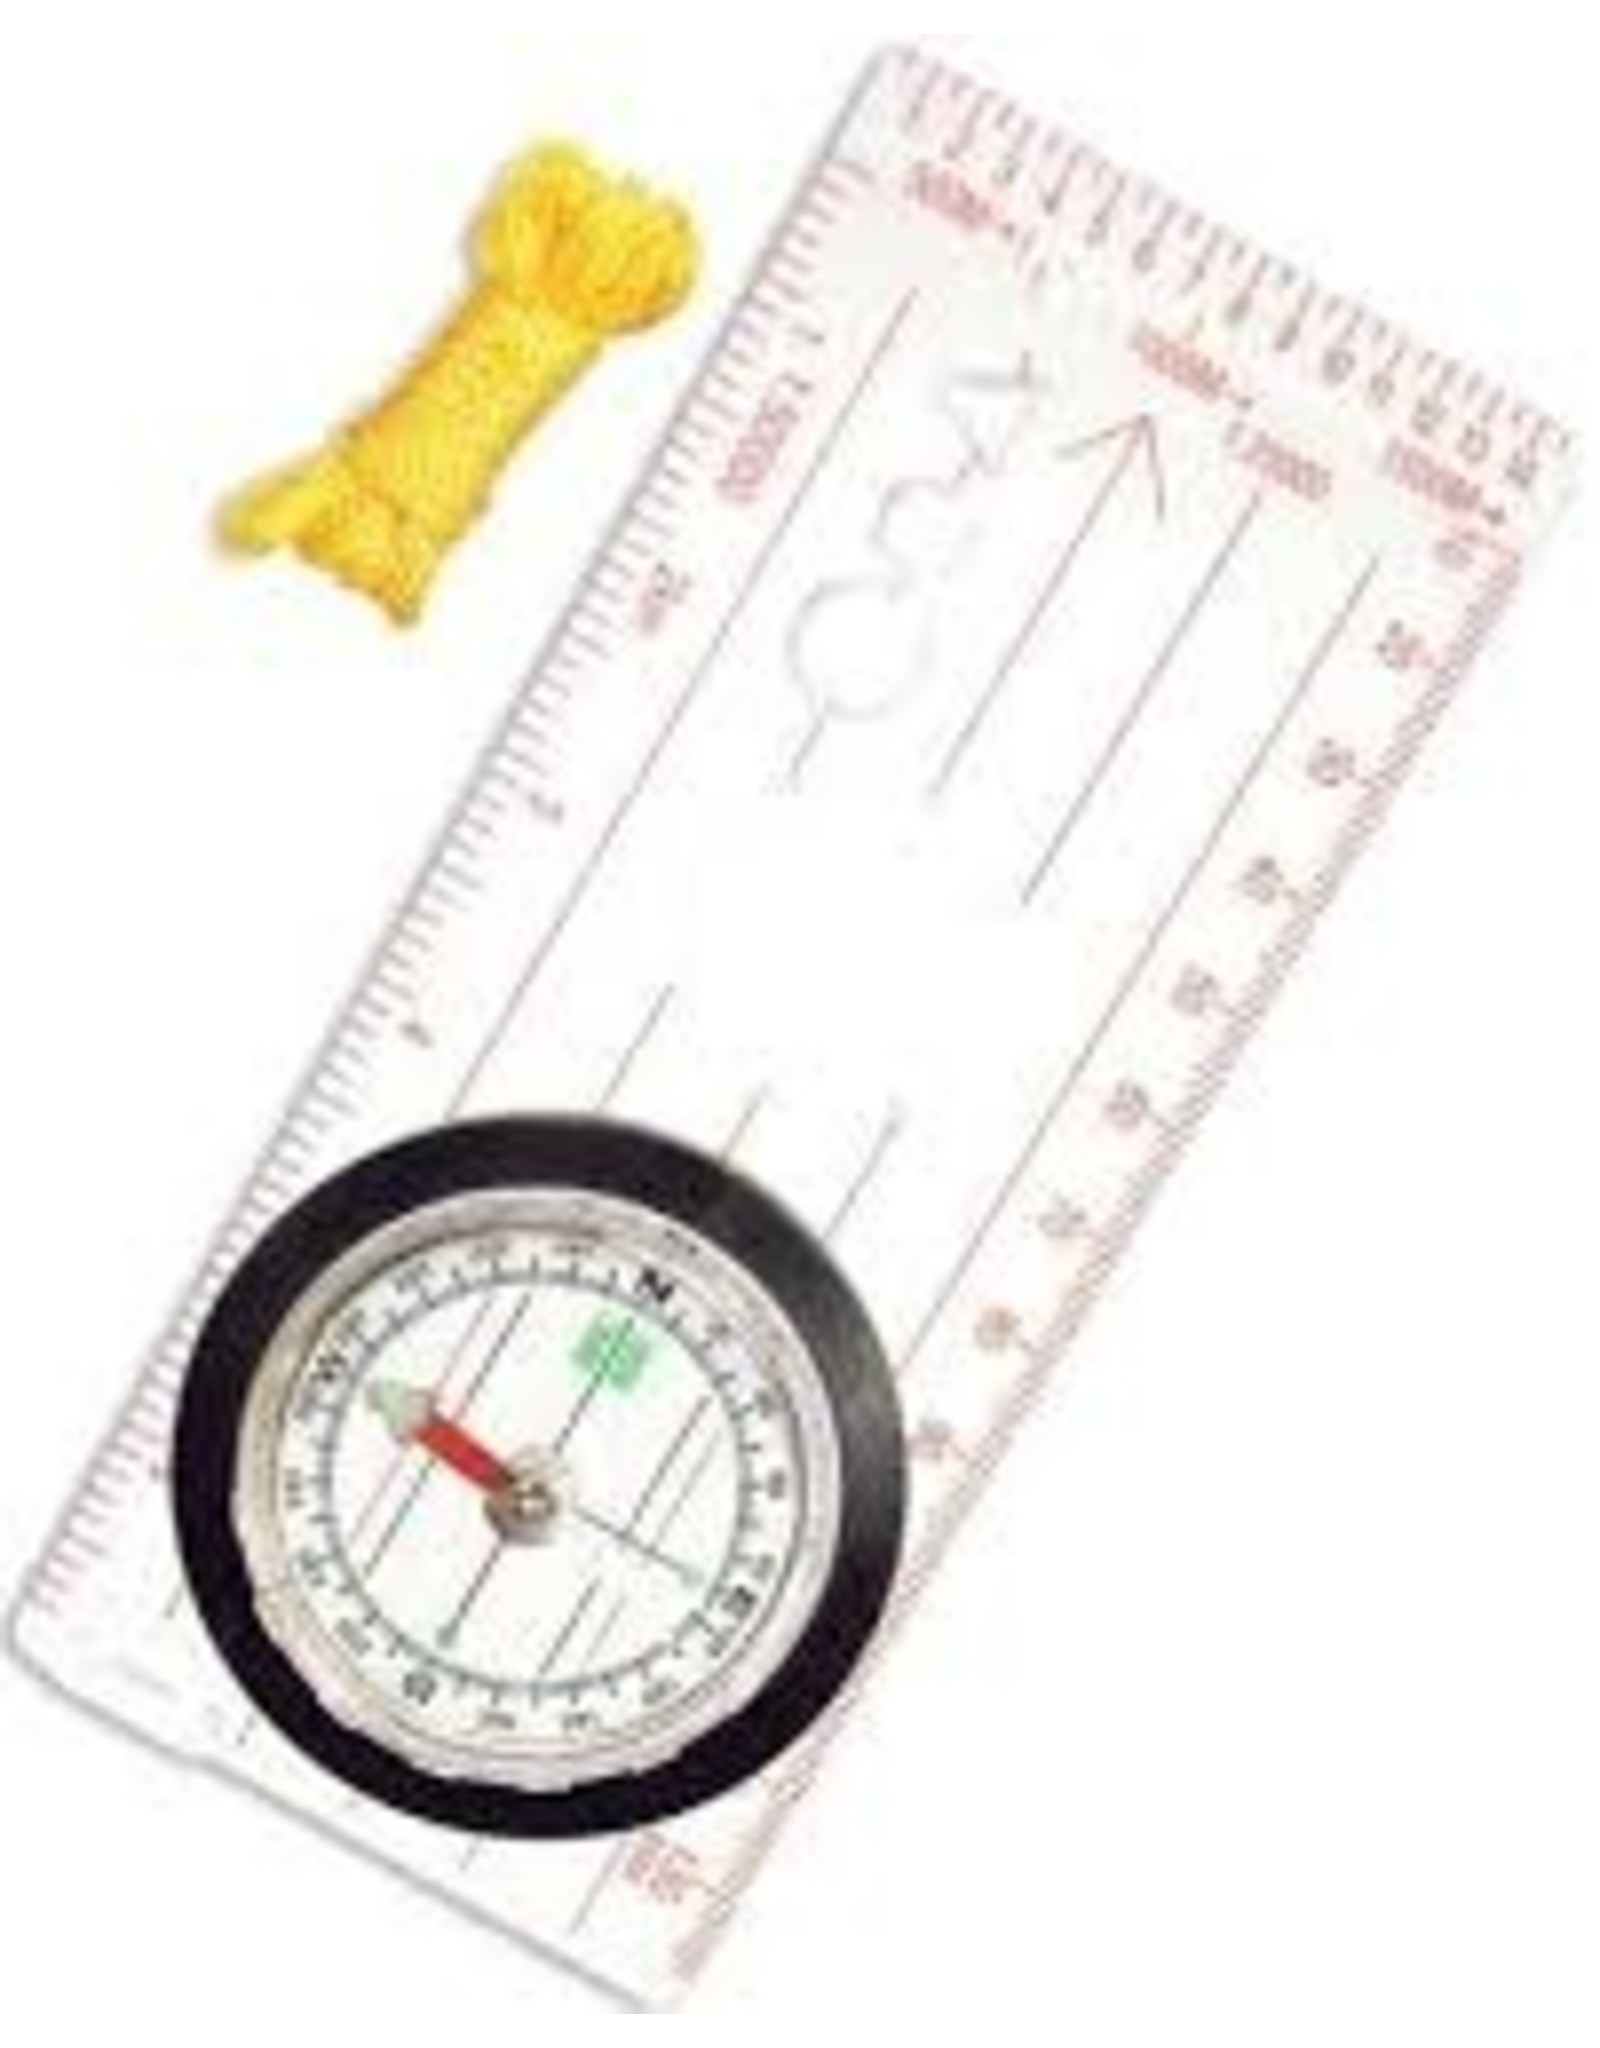 G. HJUKSTROM GH COMPASS W/MAP SCALE